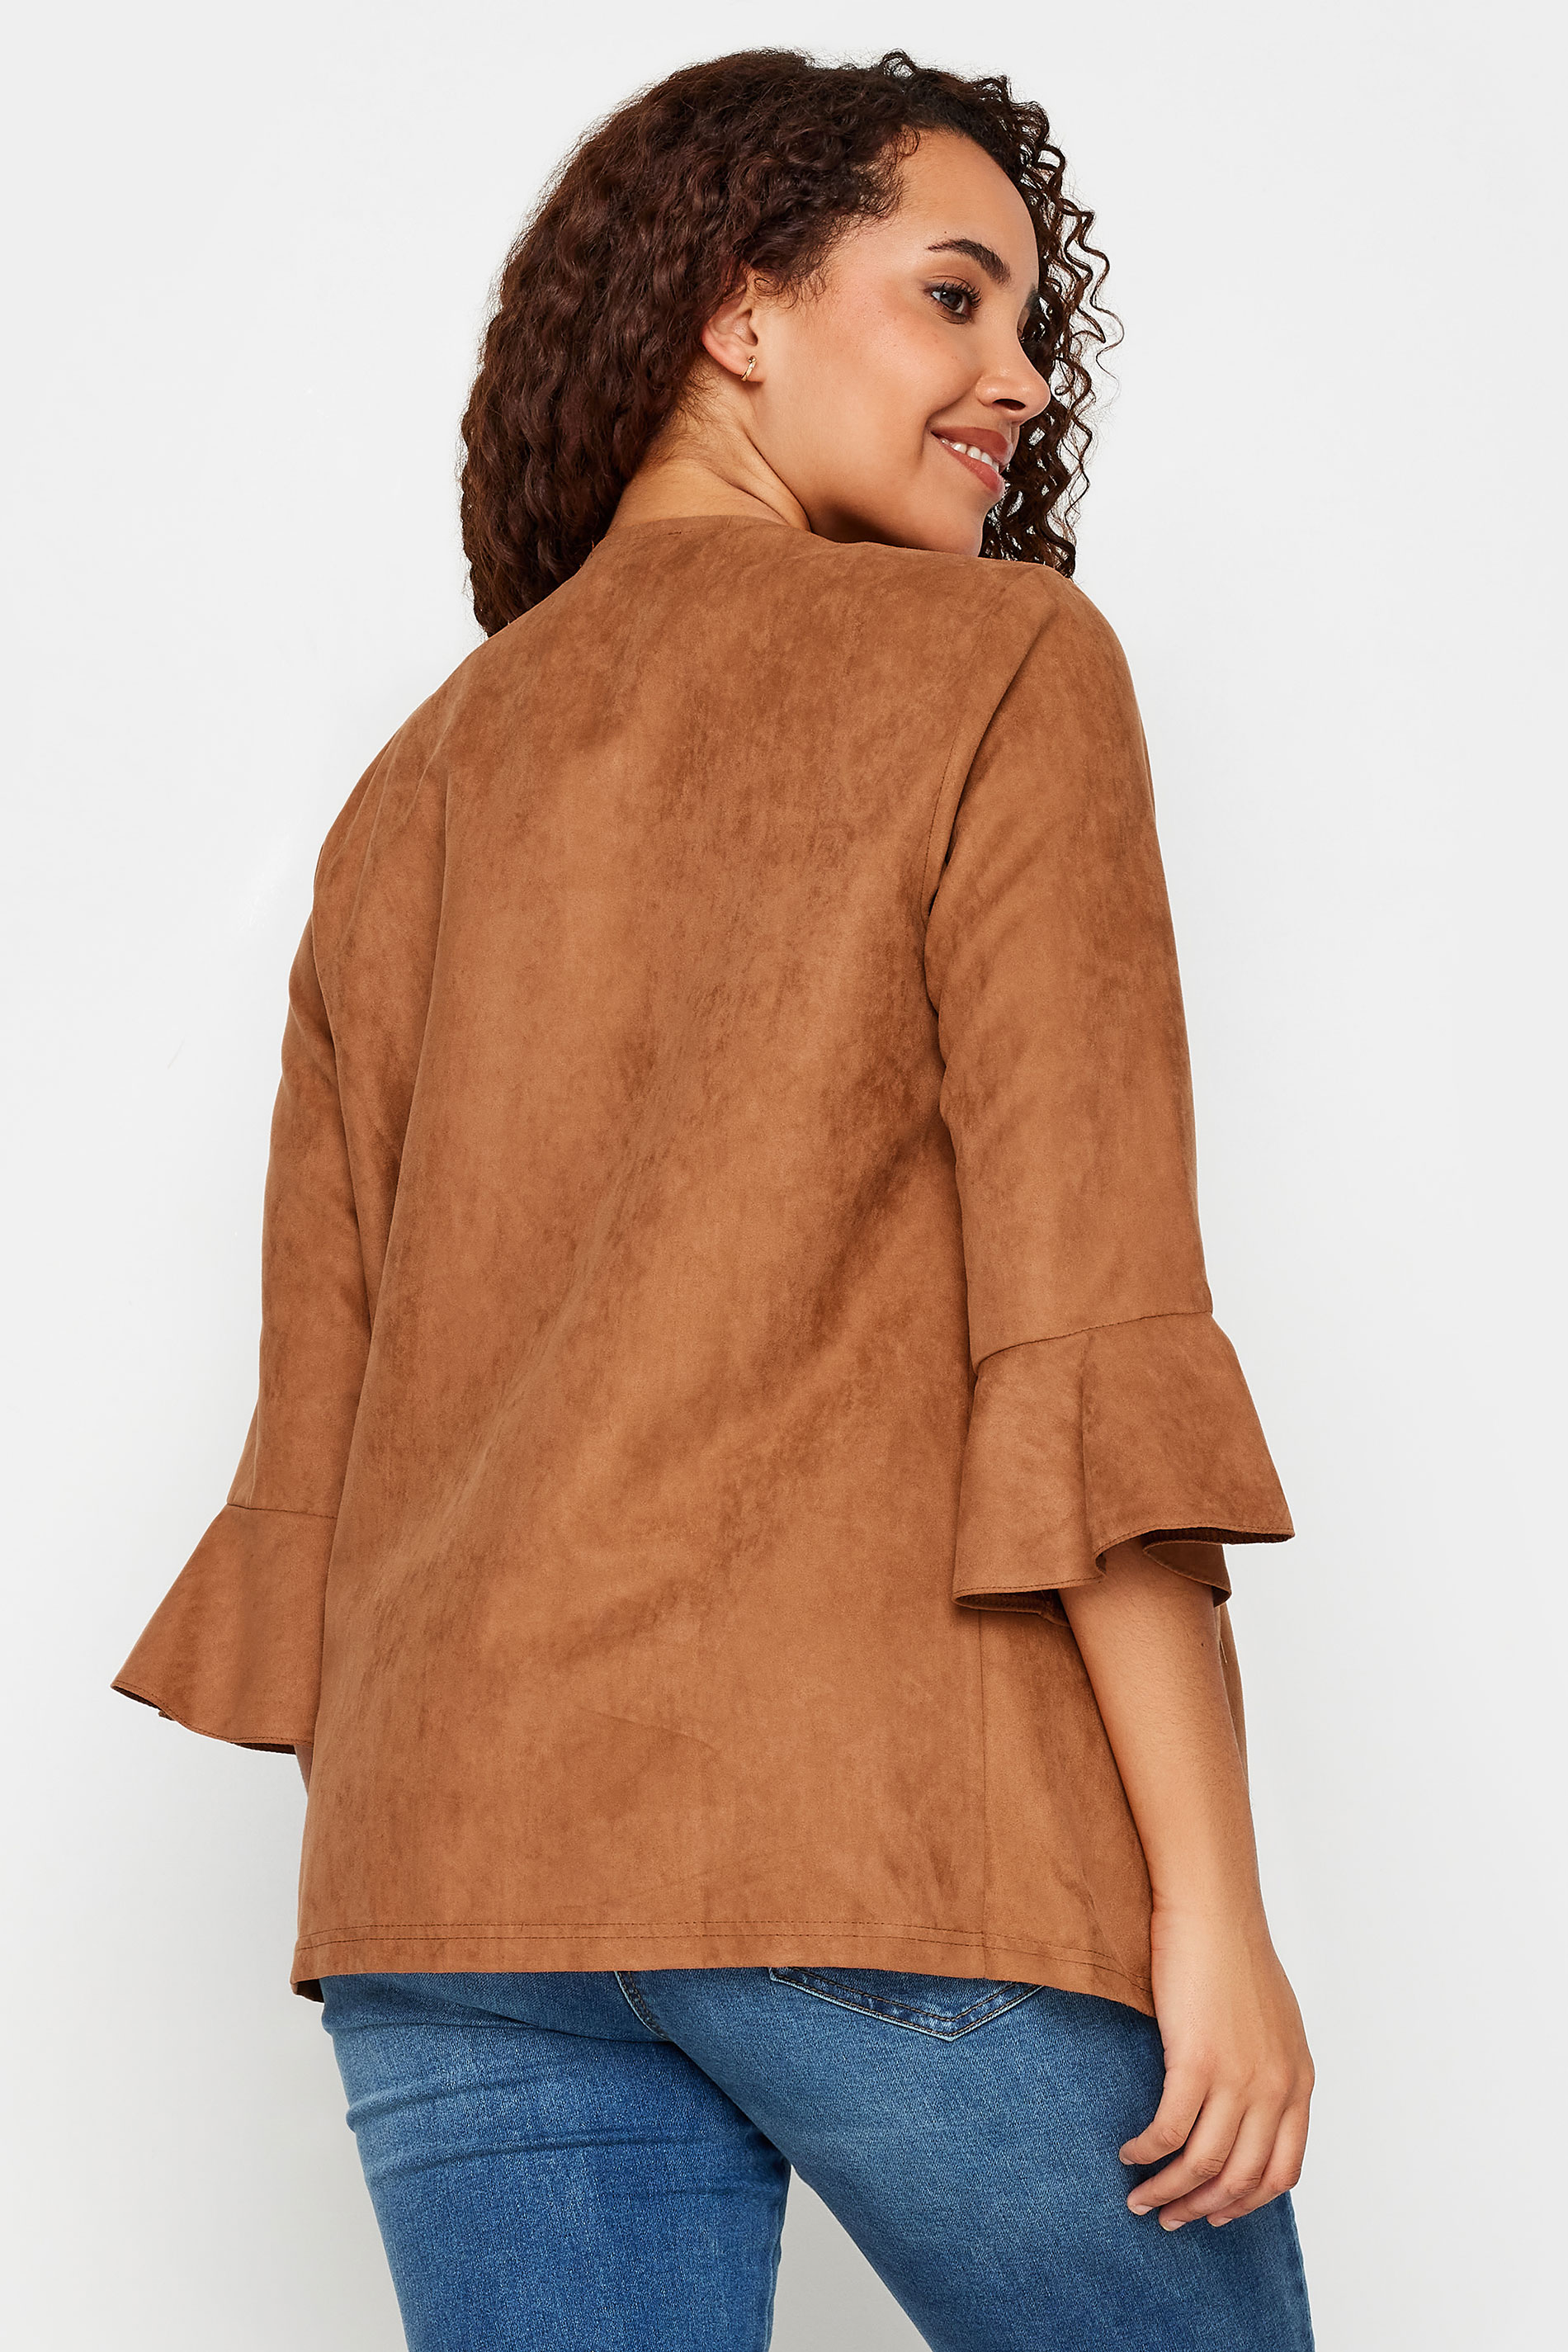 M&Co Tan Brown Suedette Waterfall Jacket | M&Co 3